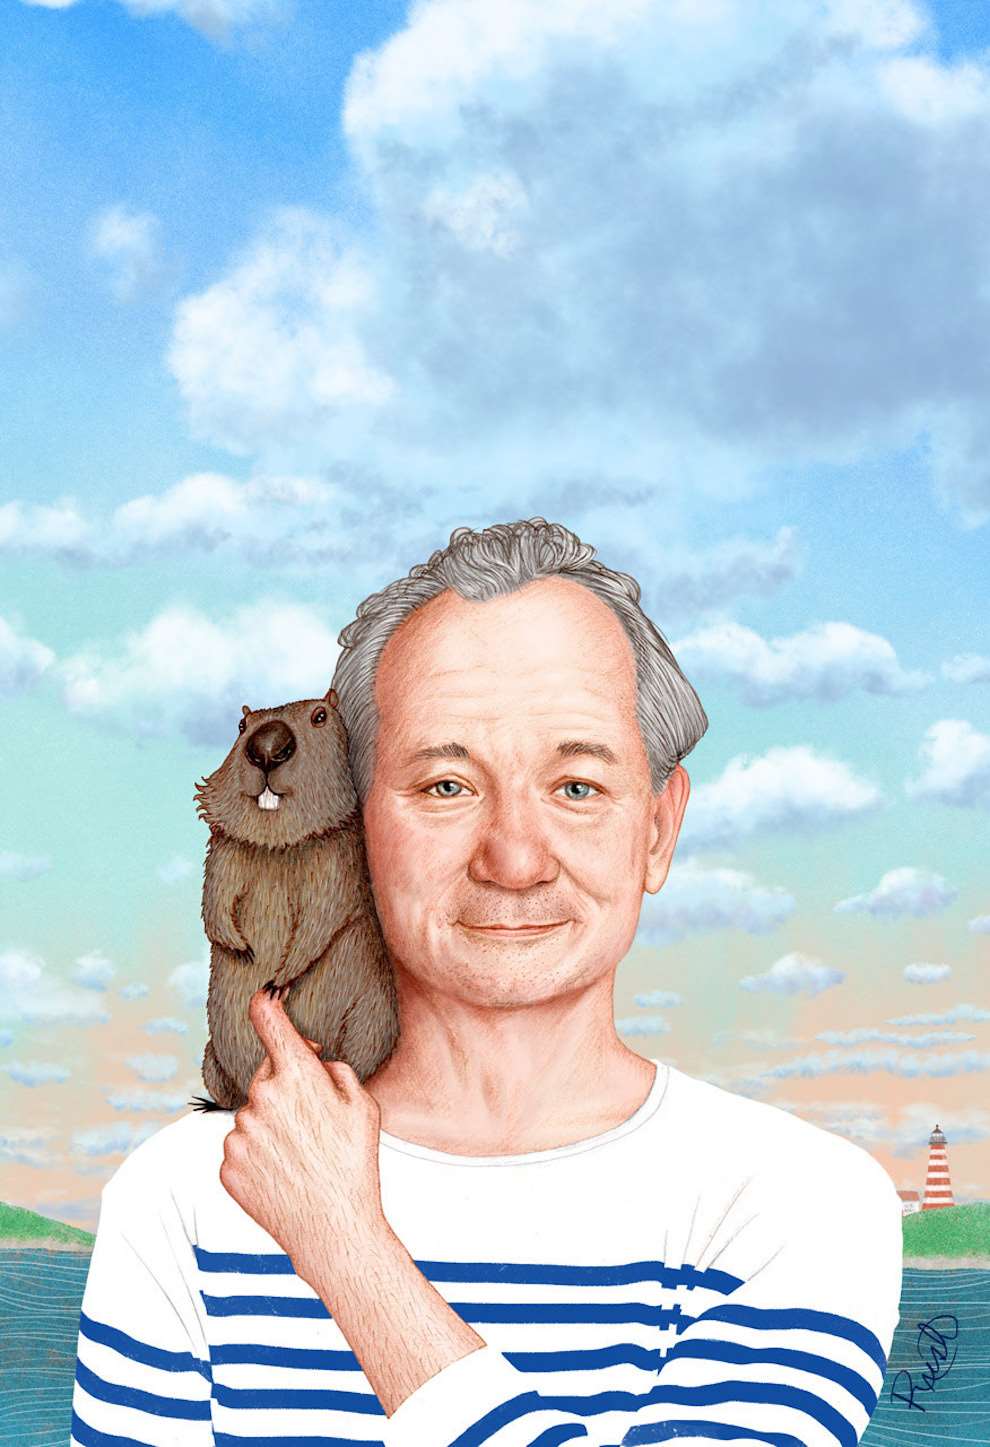 Jason Raish, Bill Murray with a groundhog in a life aquatic outfit